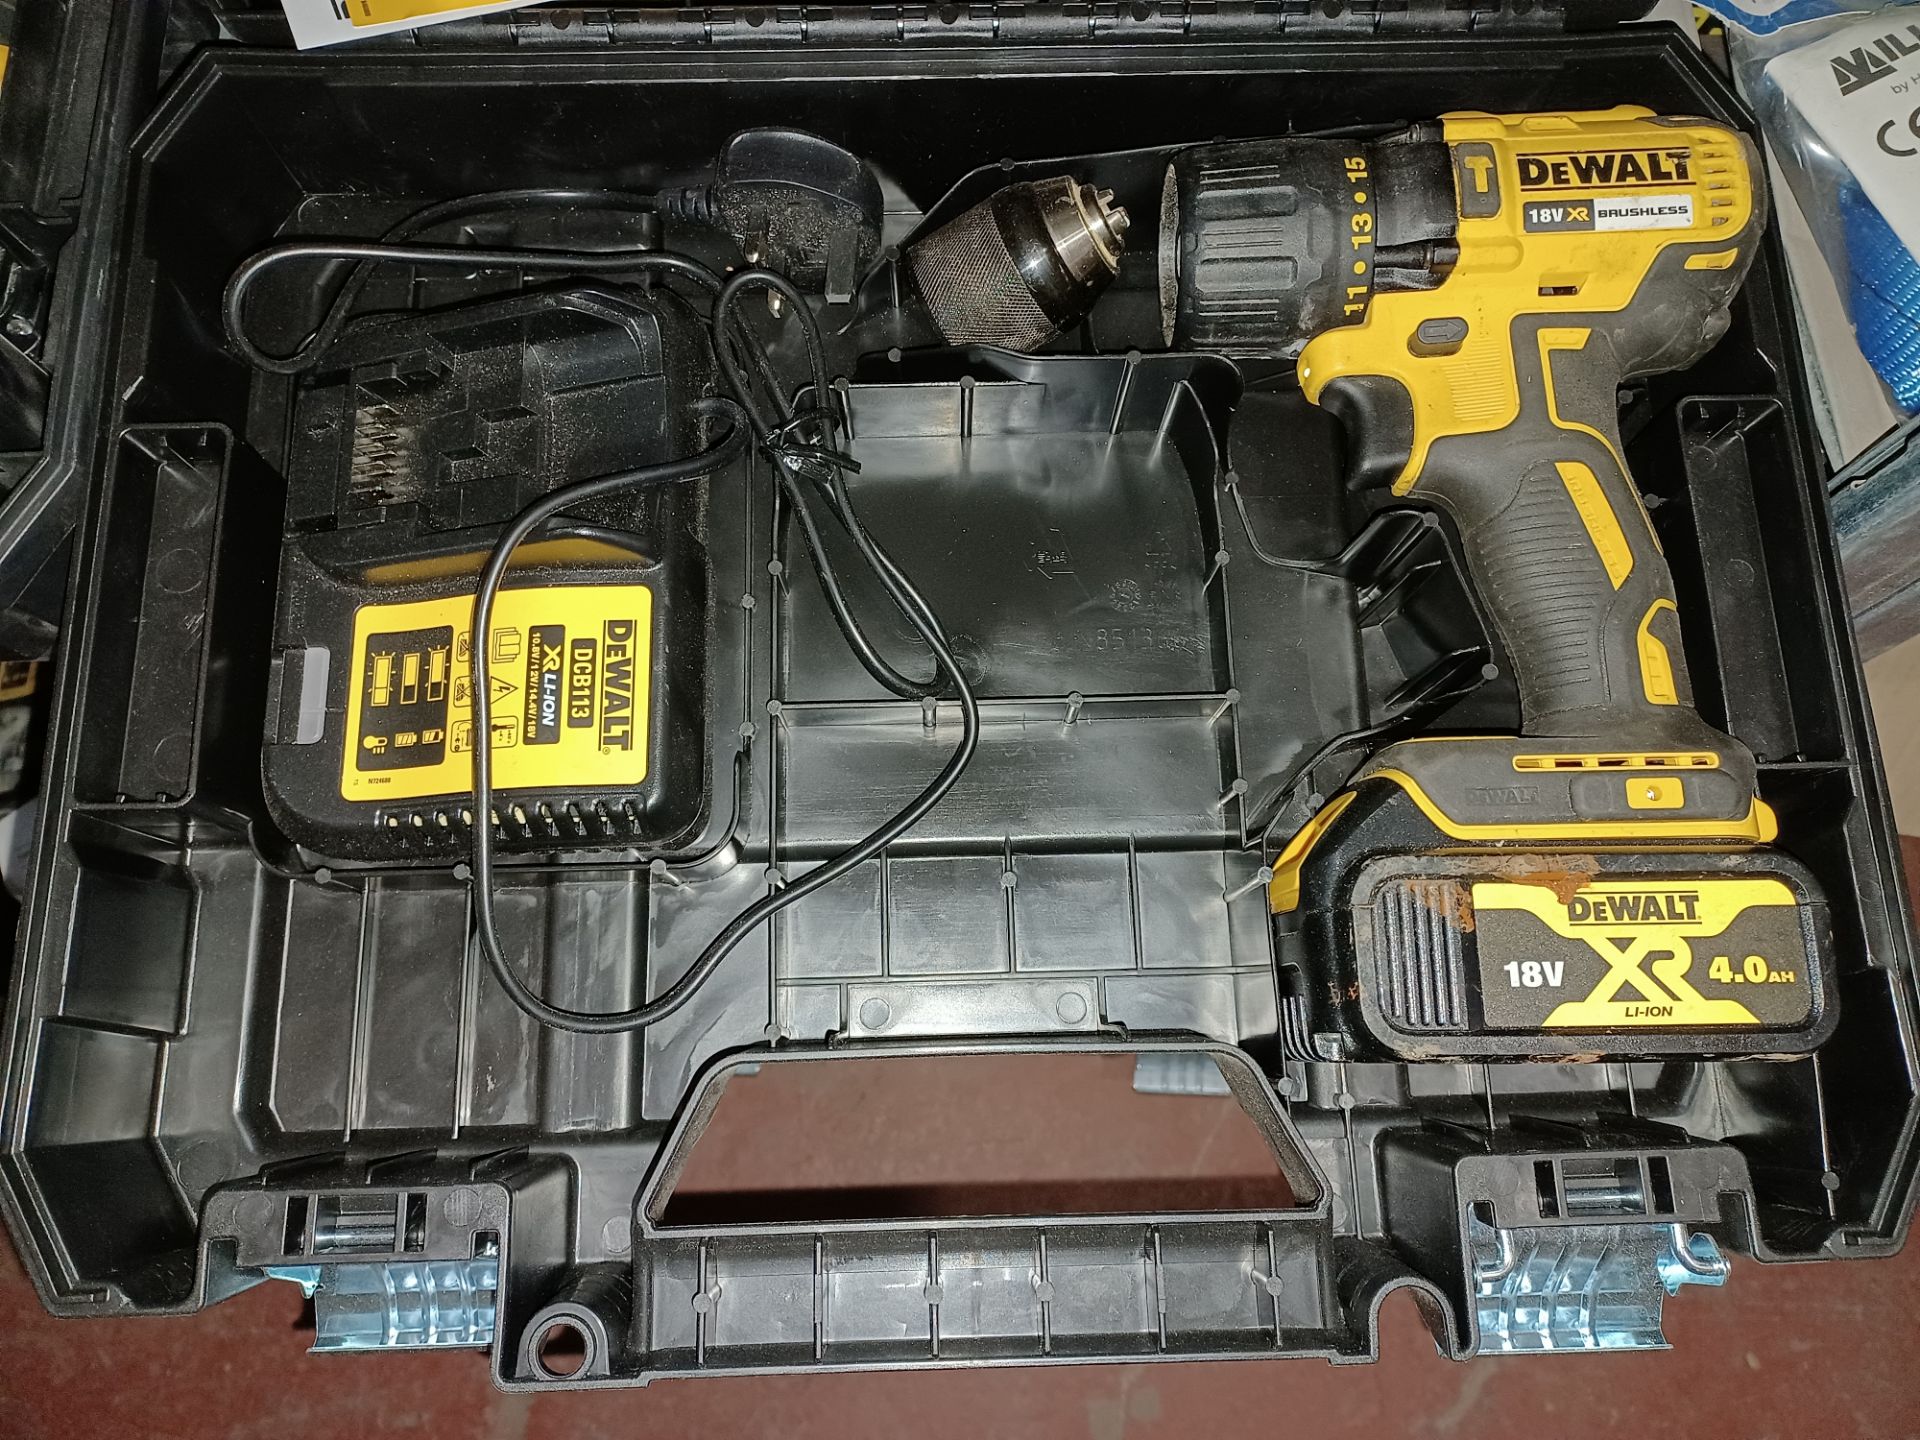 DEWALT DCD778M2T-SFGB 18V 4.0AH LI-ION XR BRUSHLESS CORDLESS COMBI DRILL COMES WITH COMES WITH 1